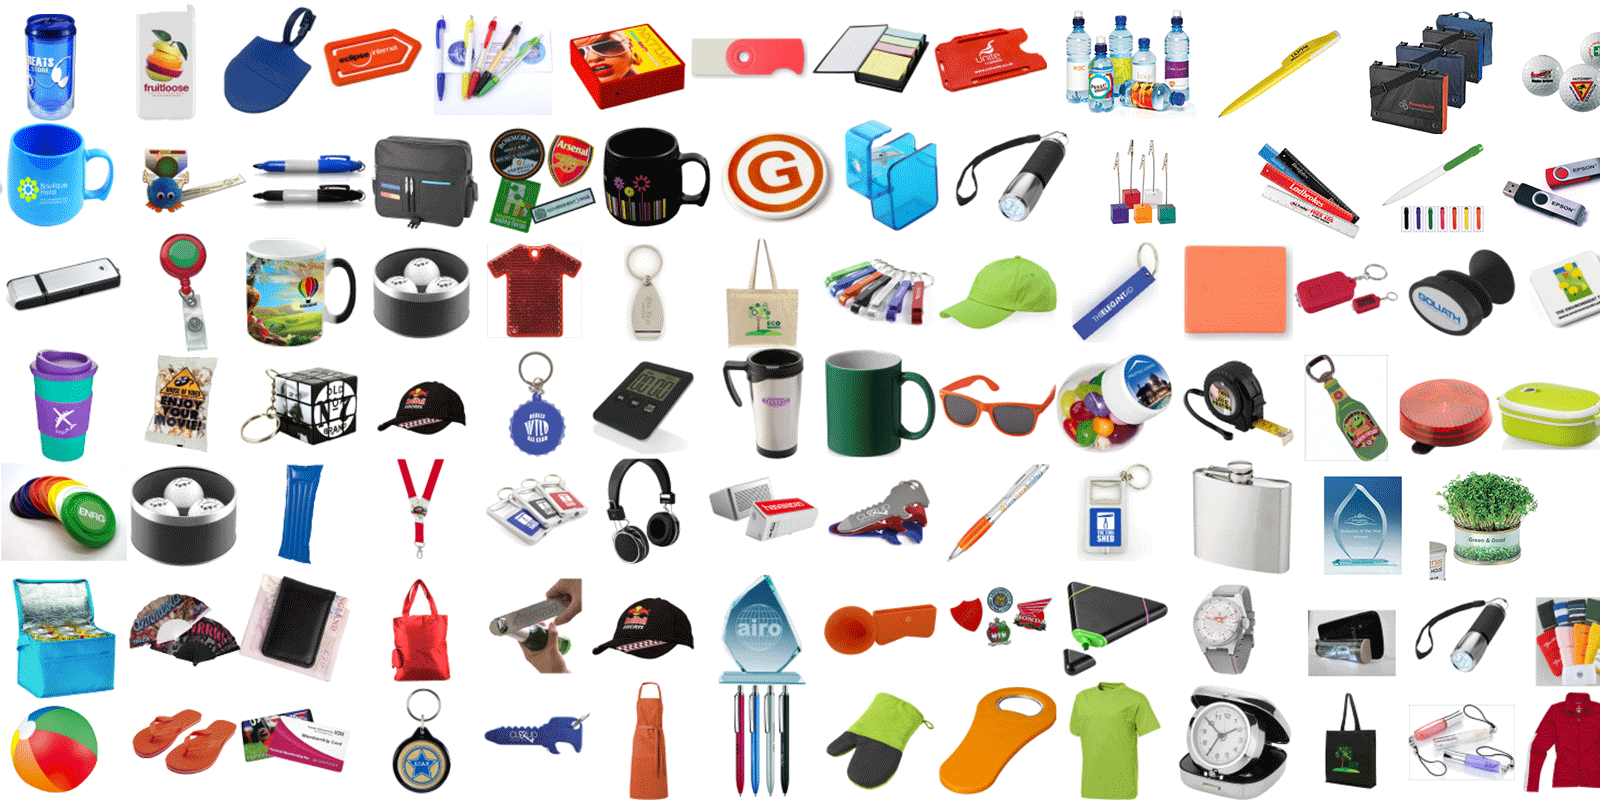 Promotional Products in Canada